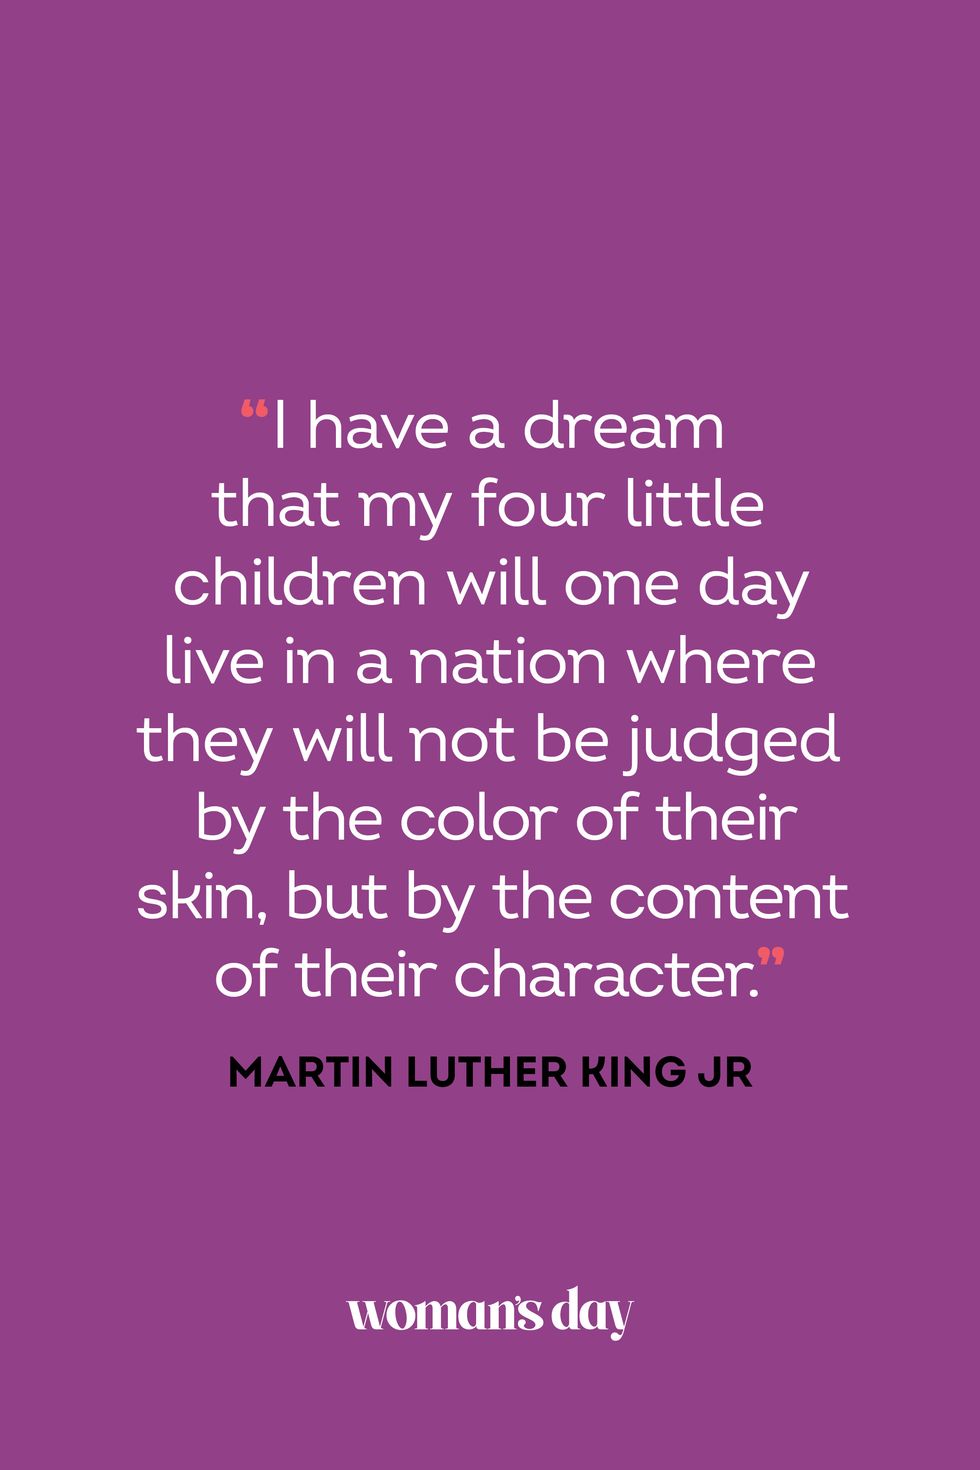 55 Famous Martin Luther King, Jr. Quotes for MLK Day - Parade